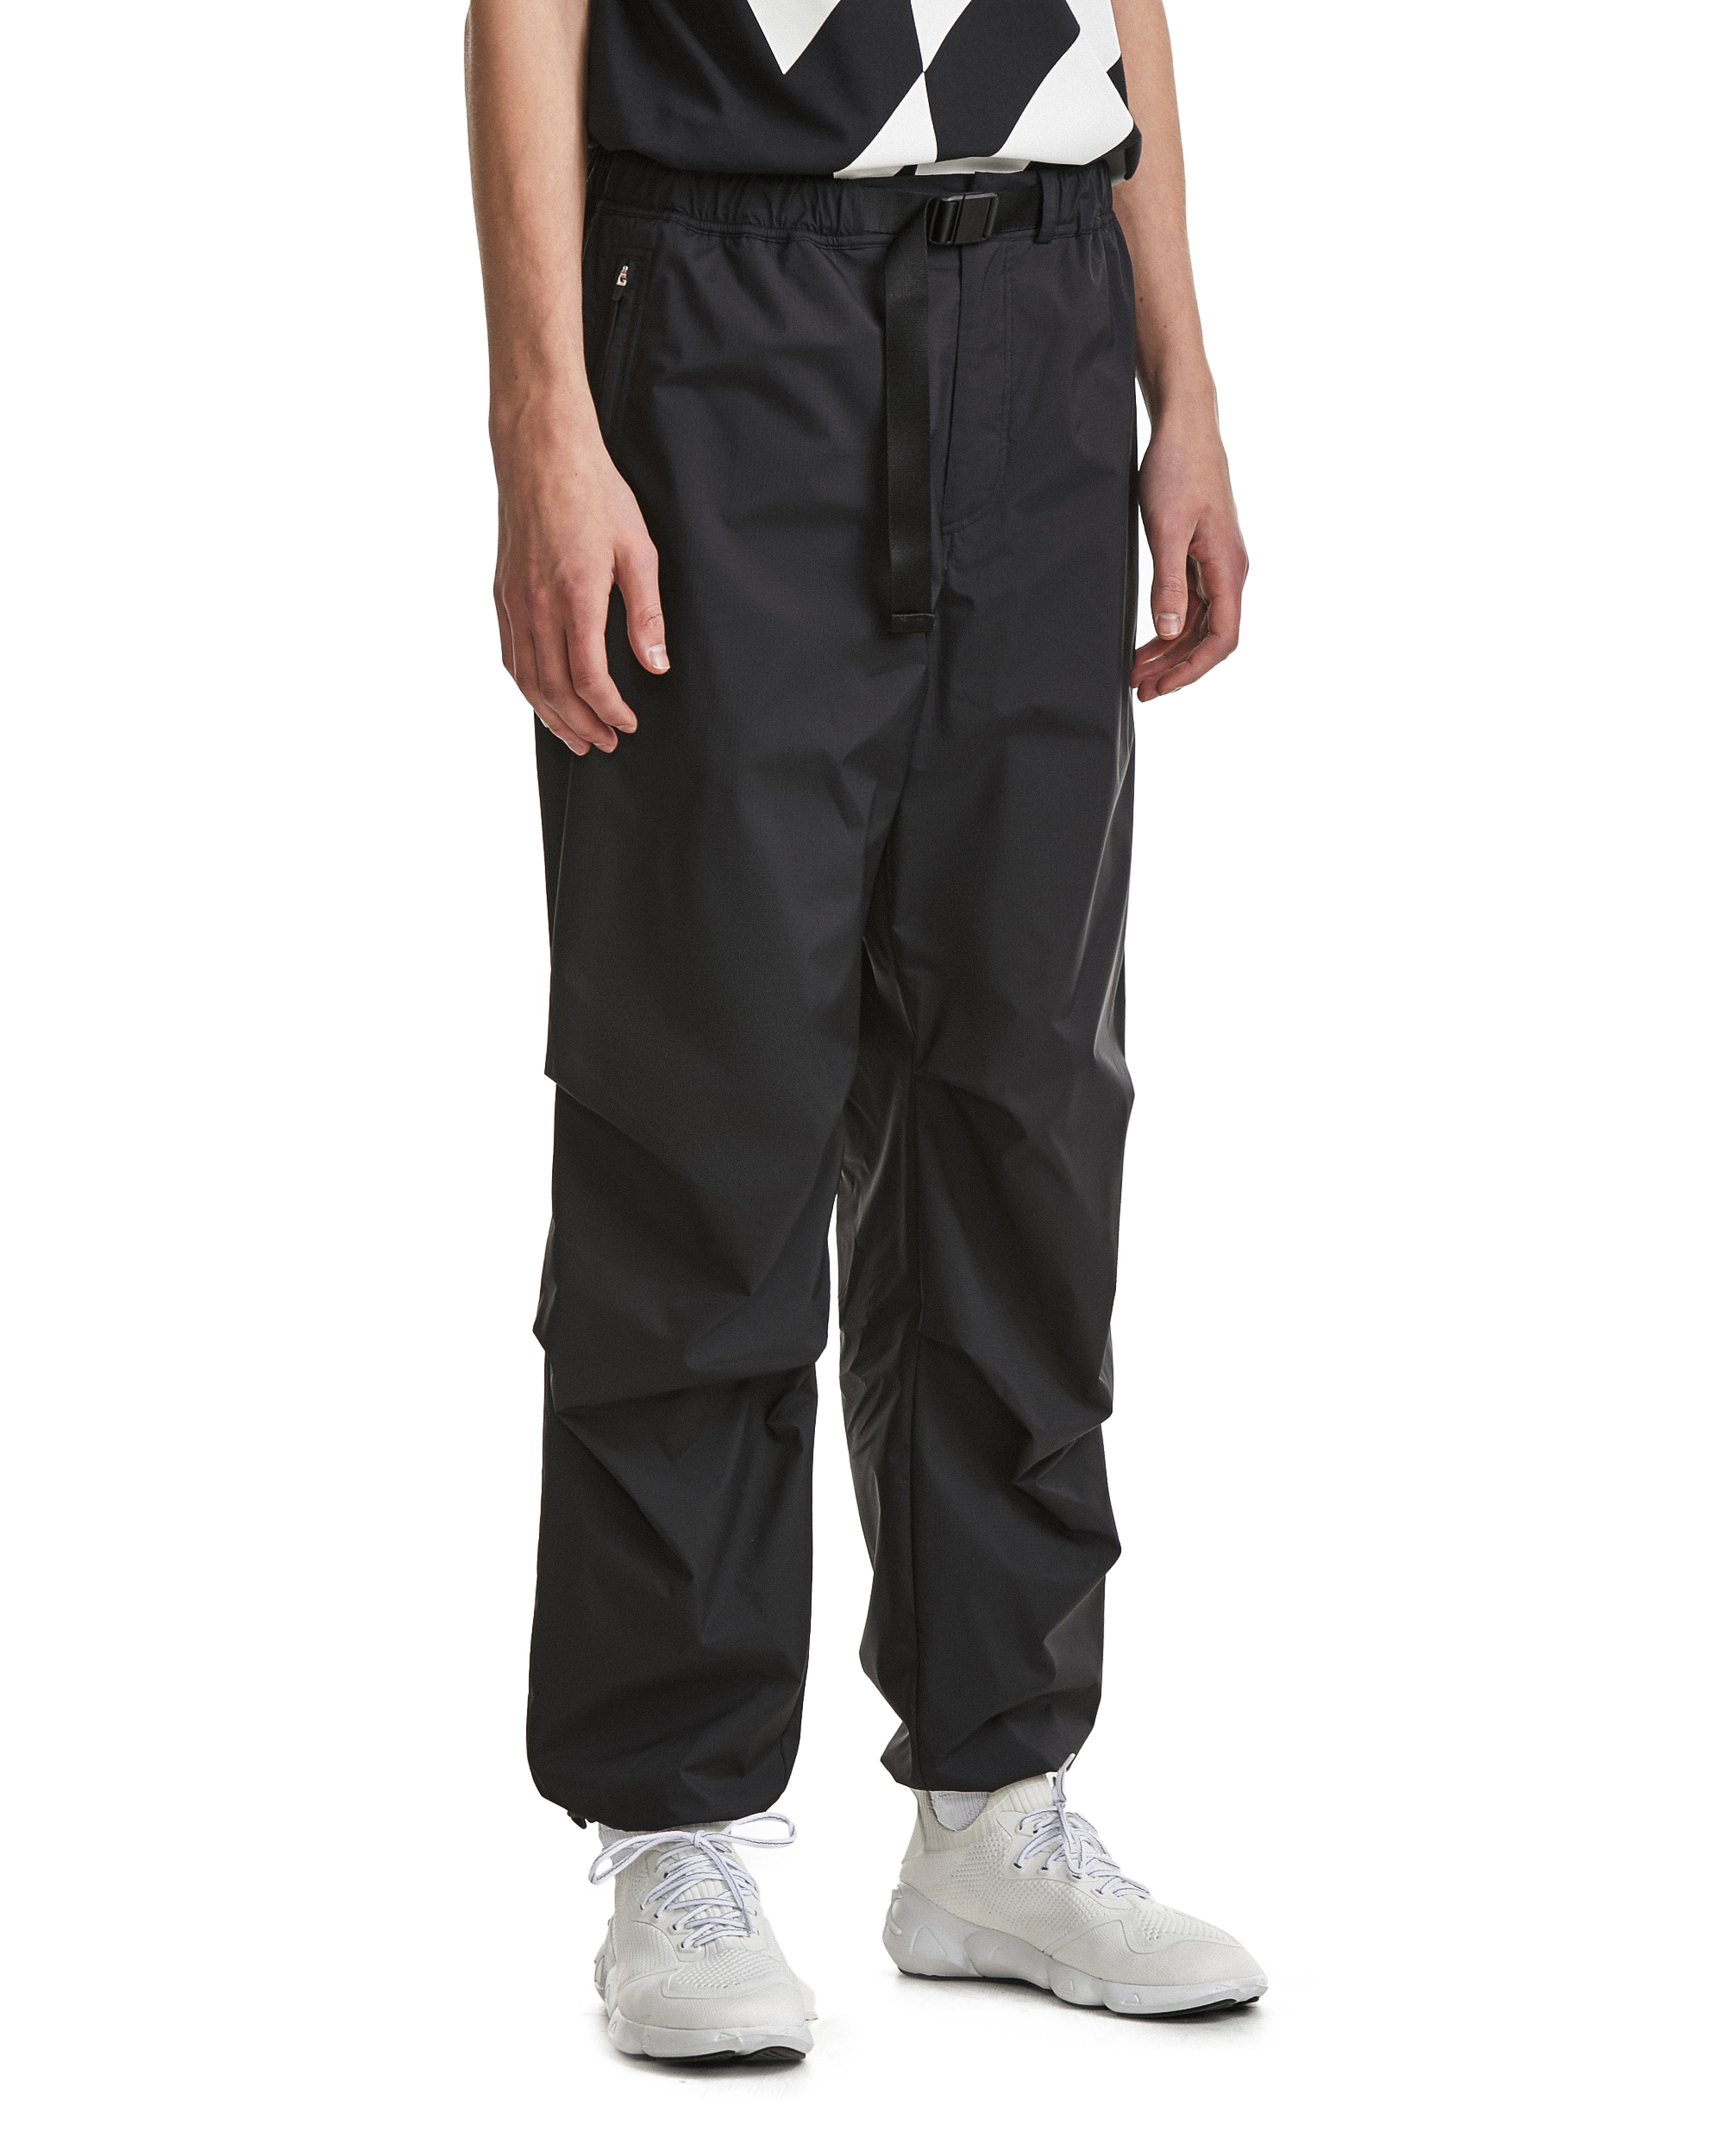 CHAANCE - 챈스 ㅣOld school jogger pants